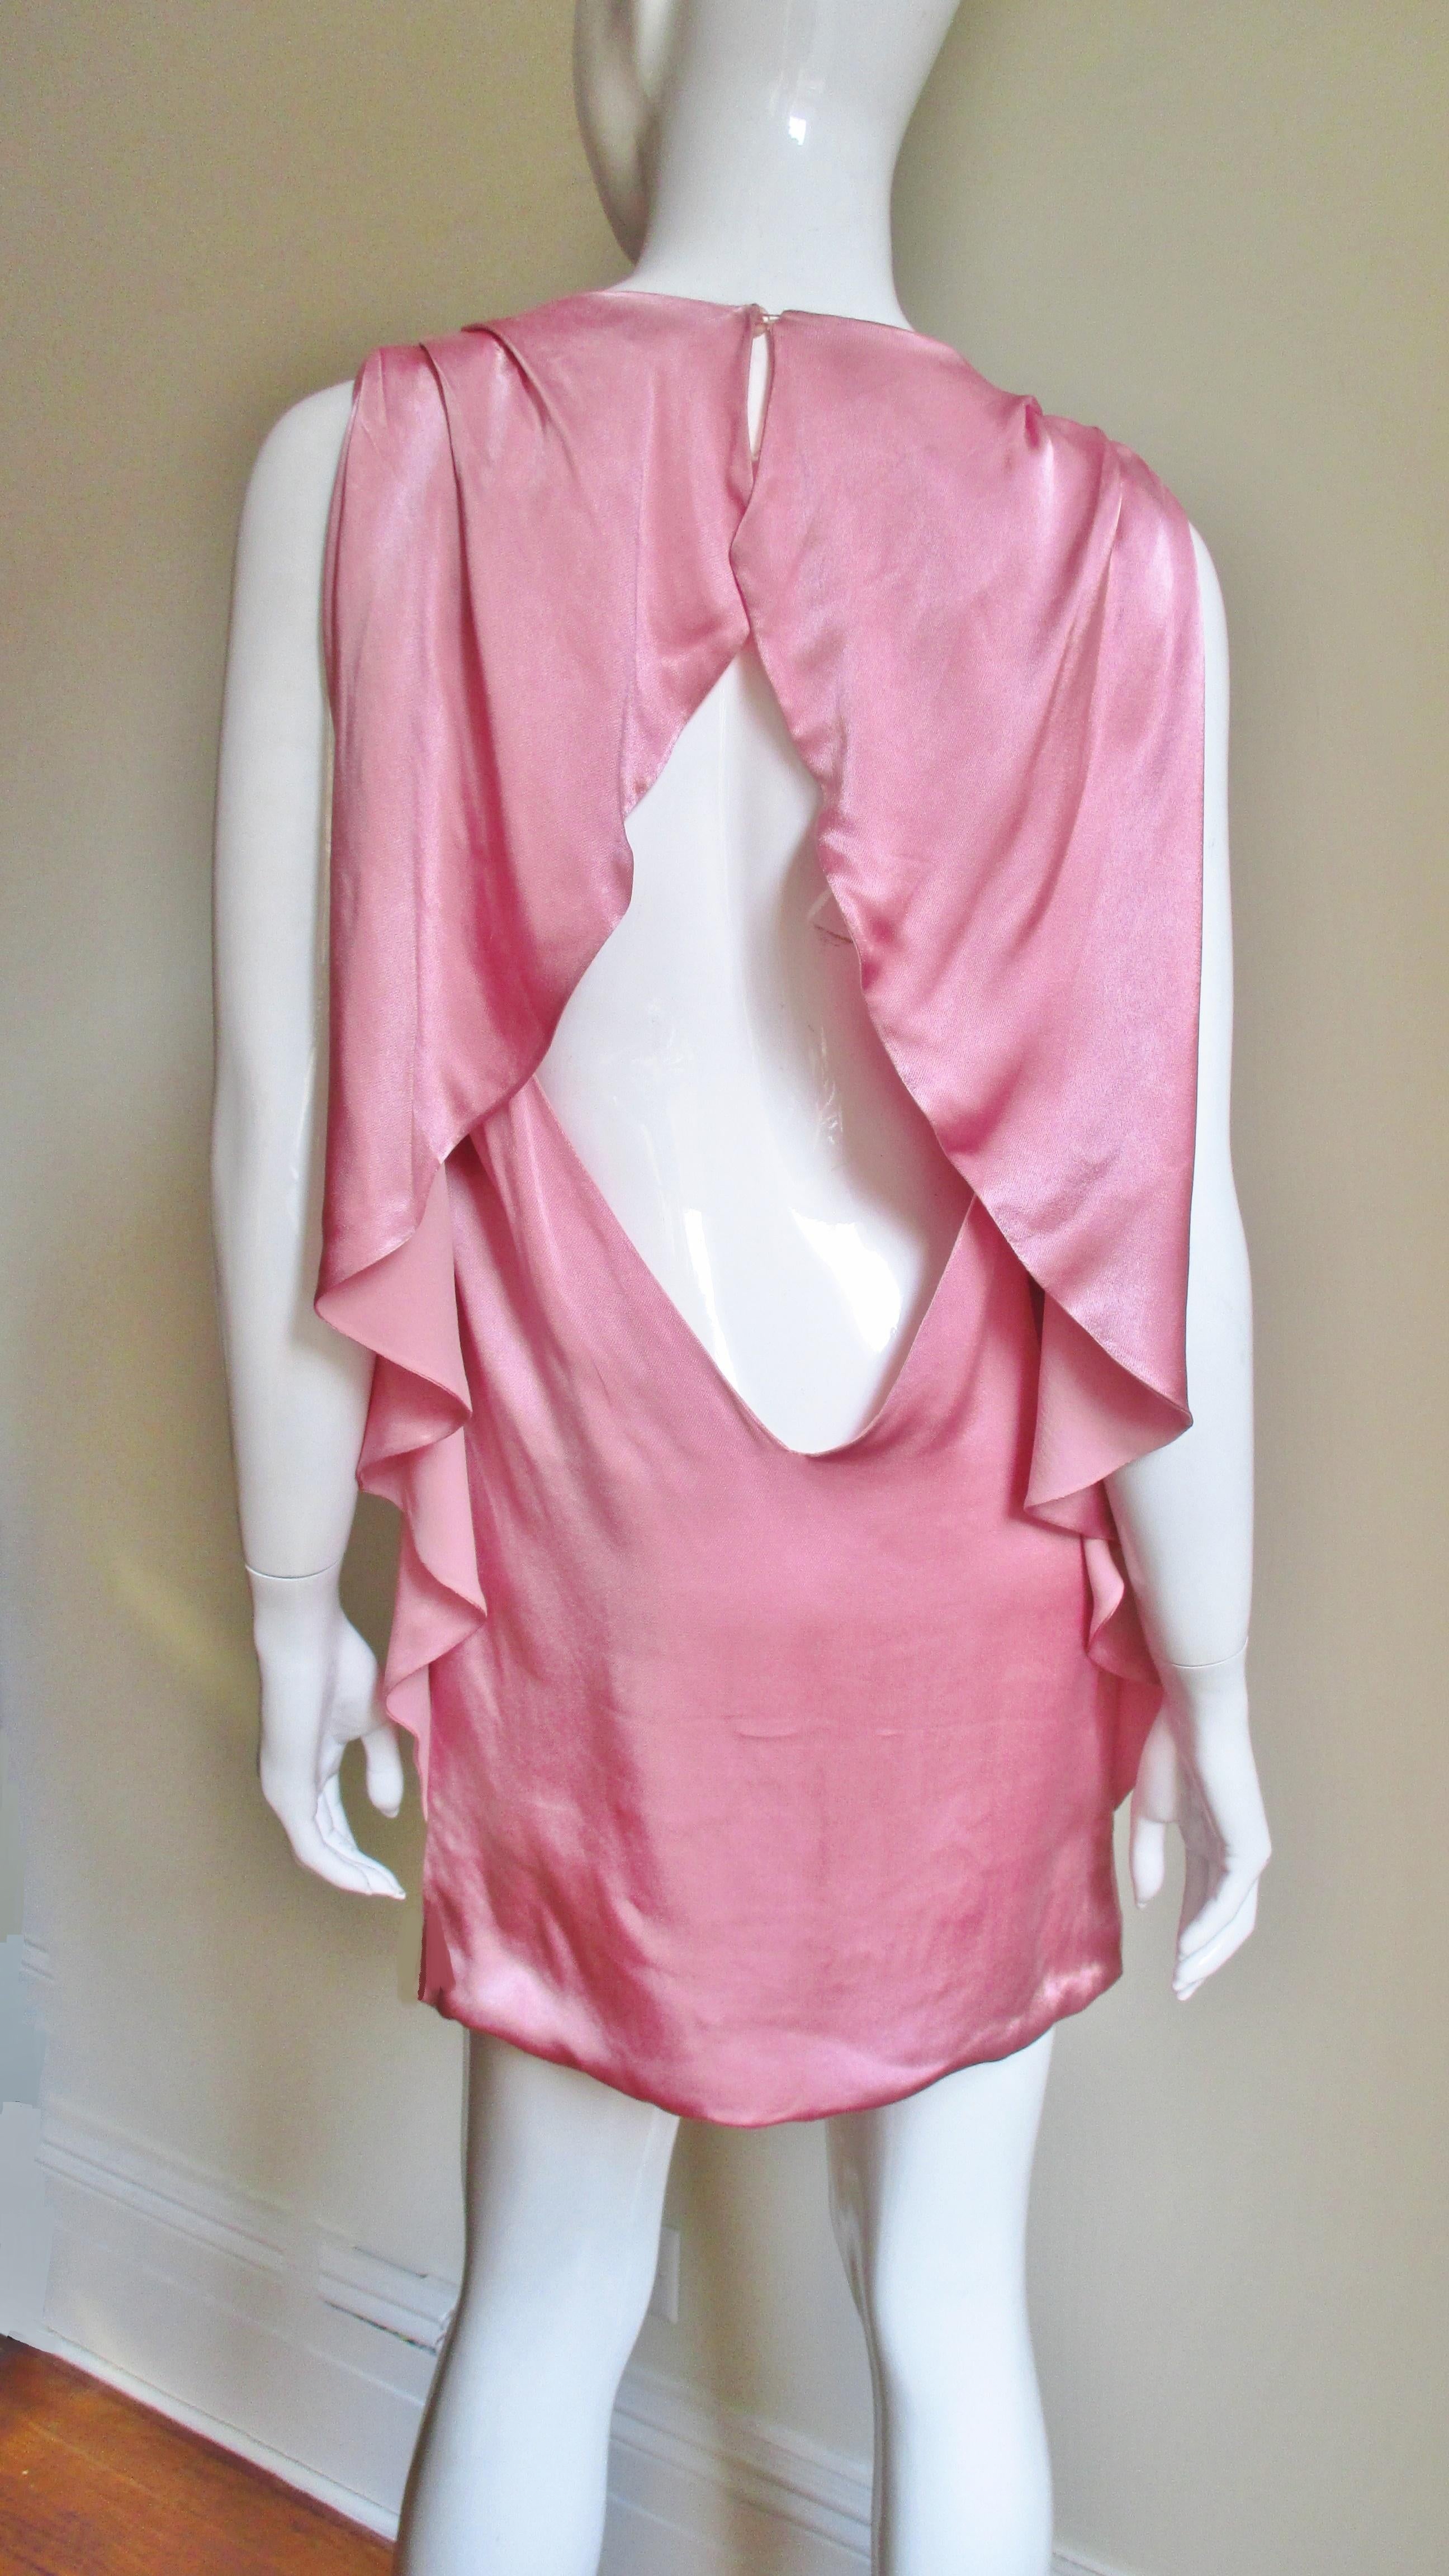 A beautiful pink silk dress from Versace.  It is is a simple sleeveless sheath from the front. The back is exposed from the shoulders to low back with the exception of draping framing it across the shoulders and sides of the dress.  The dress is